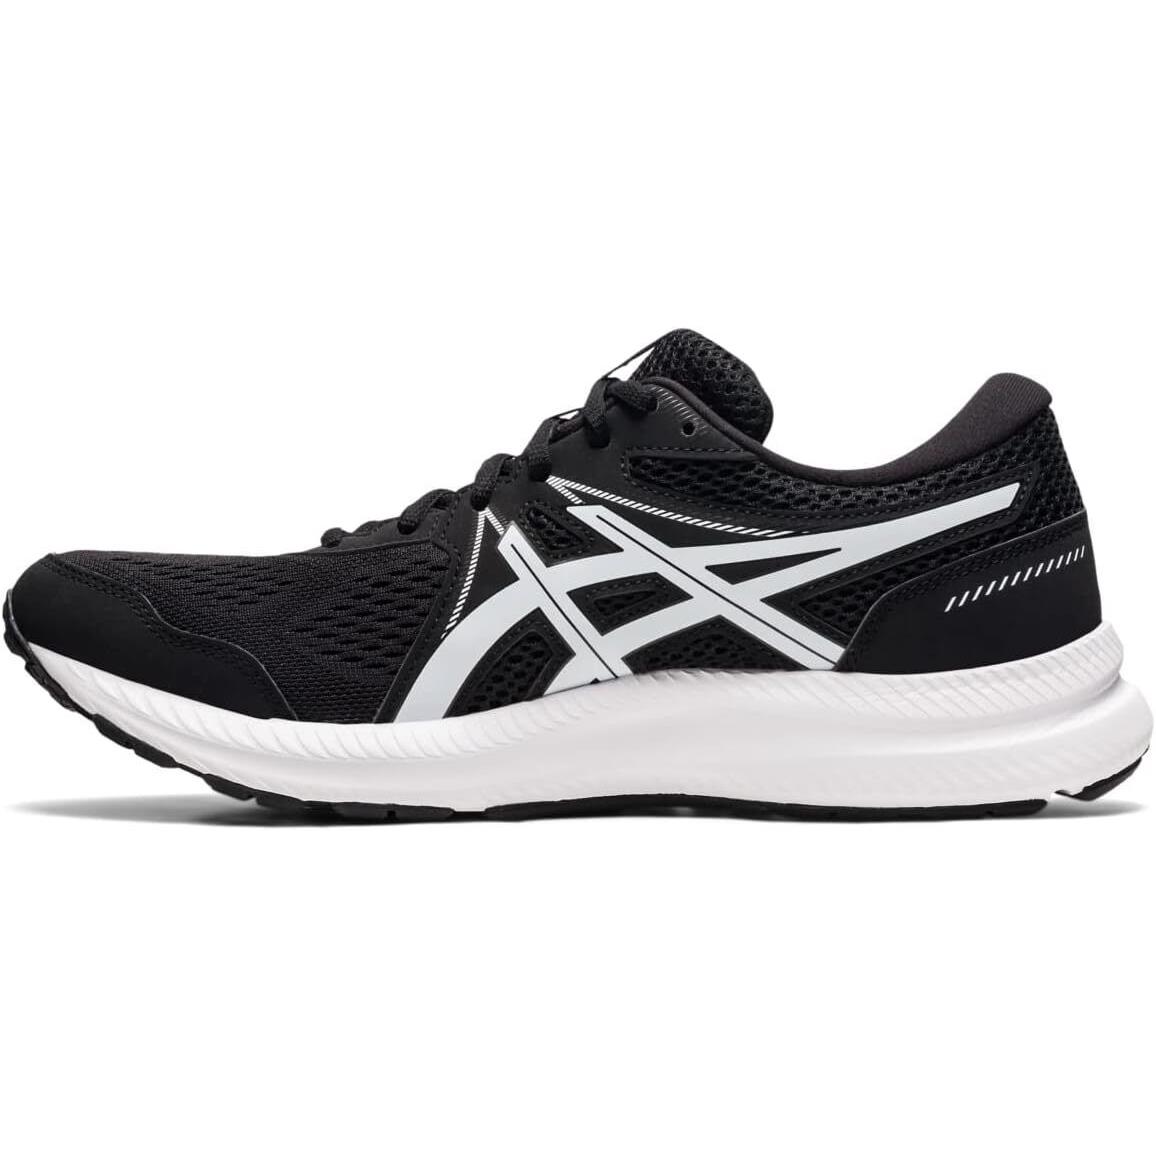 Asics Mens Gel-contend 7 Trail Running Athletic Shoe Casual Sneakers Black/white